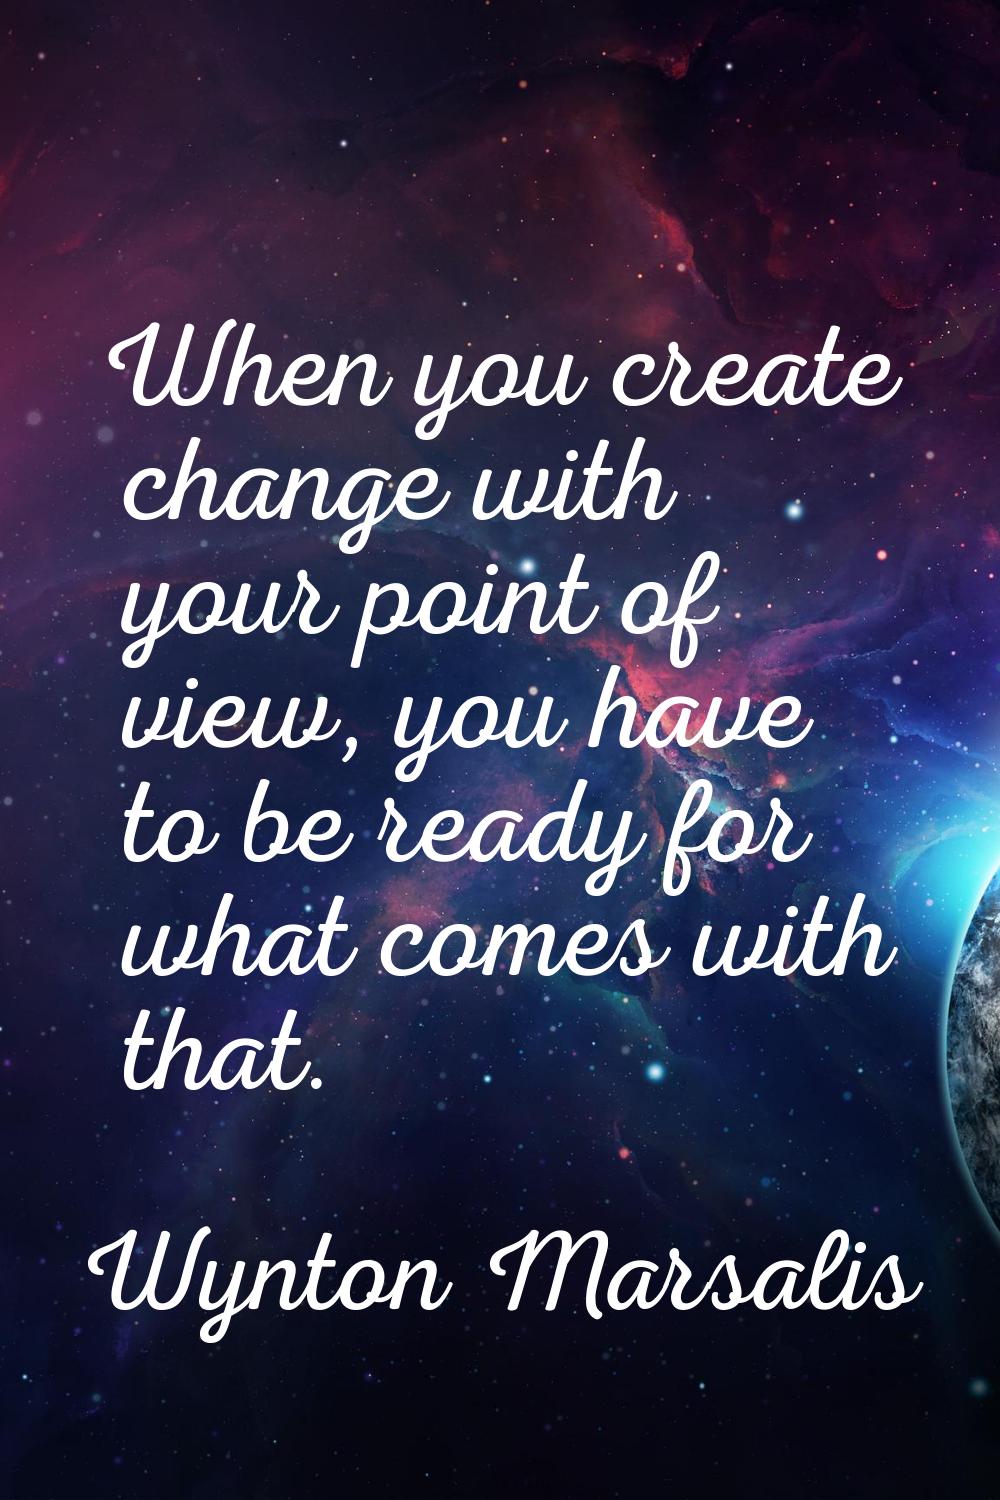 When you create change with your point of view, you have to be ready for what comes with that.